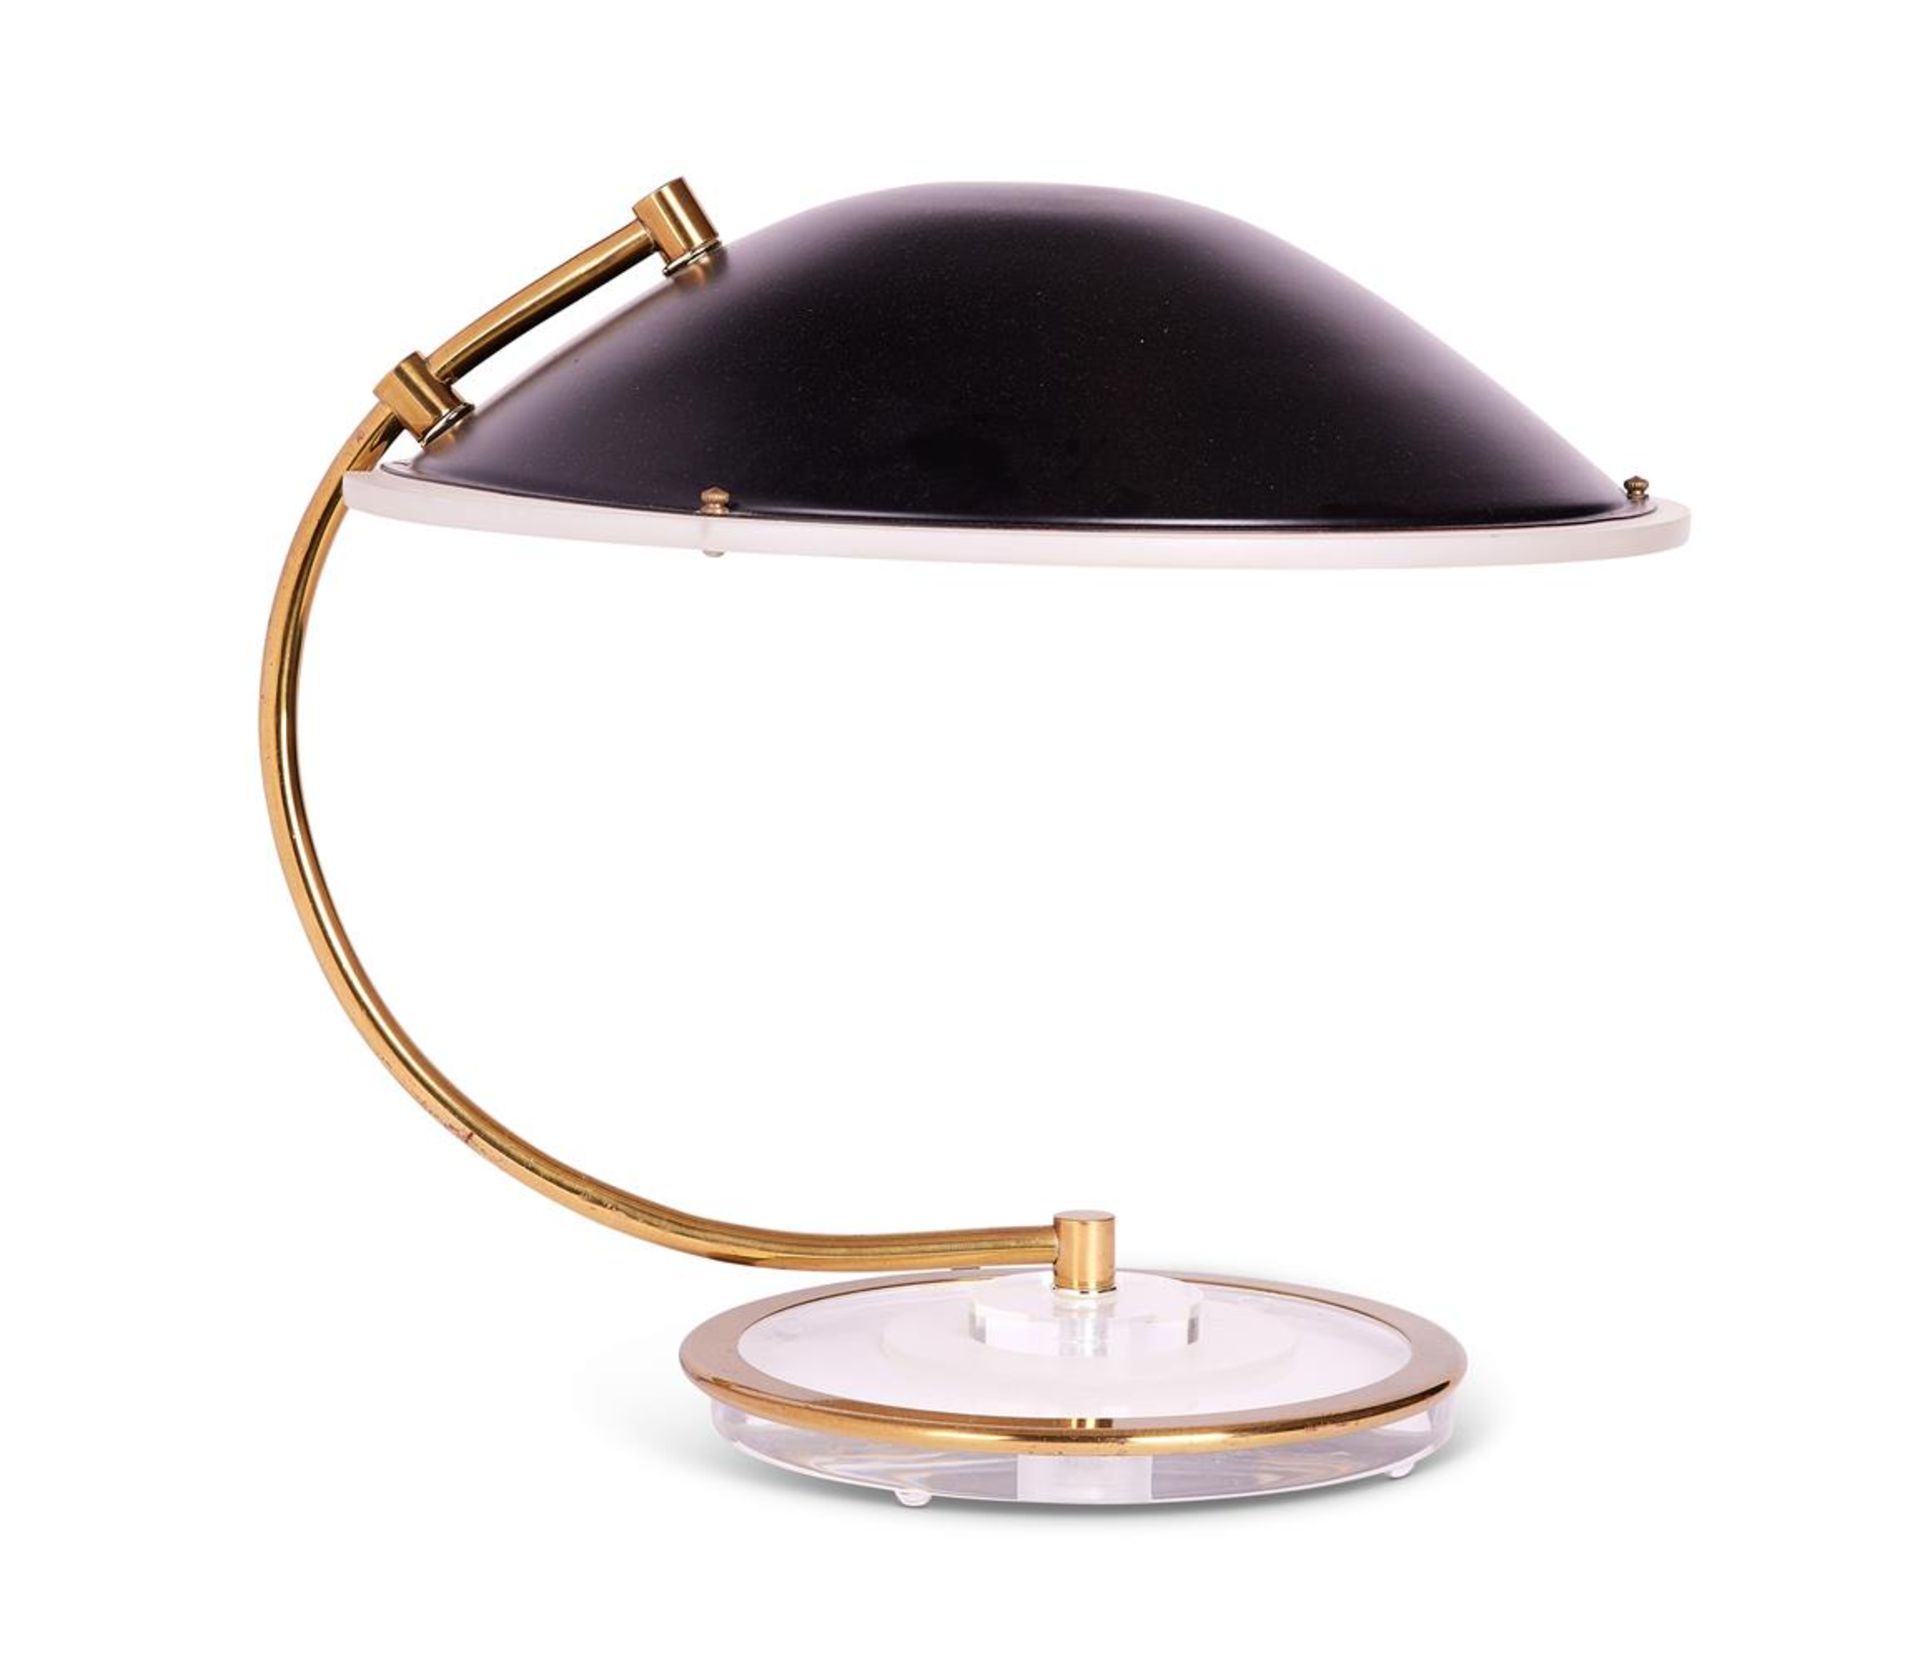 A BRASS AND LUCITE DESK LAMP BY THE BAUER LAMP COMPANY, 1983